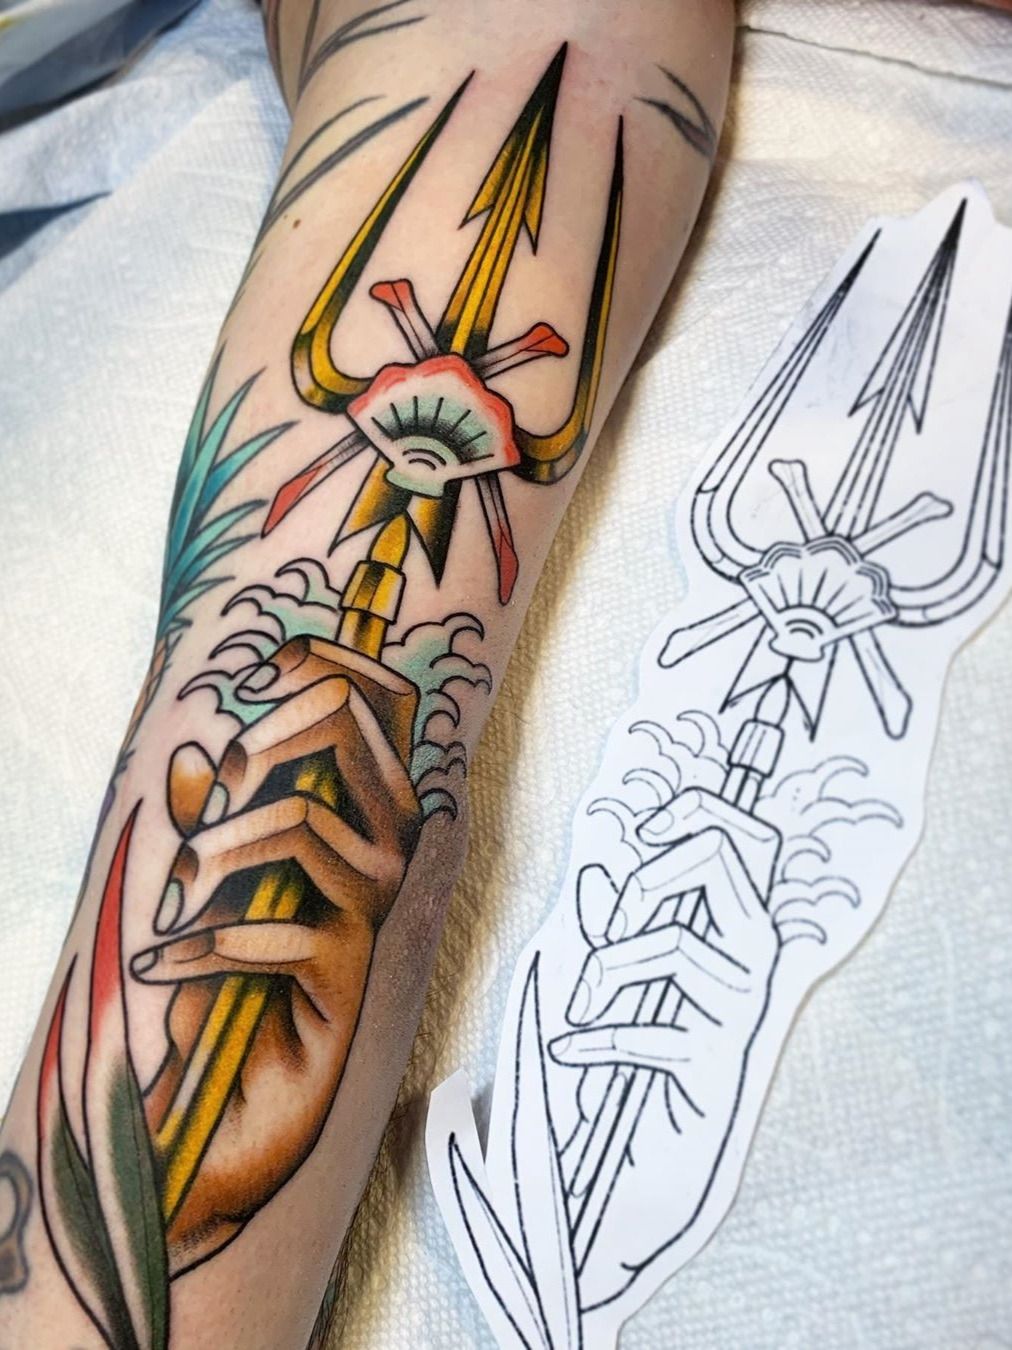 Tattoo uploaded by Jennifer R Donnelly • Trident tattoo by Baz Tattoos  #baztattoos #tridenttattoo #trident #traditional #hand #leaves #color  #neotraditional #upperarm • Tattoodo